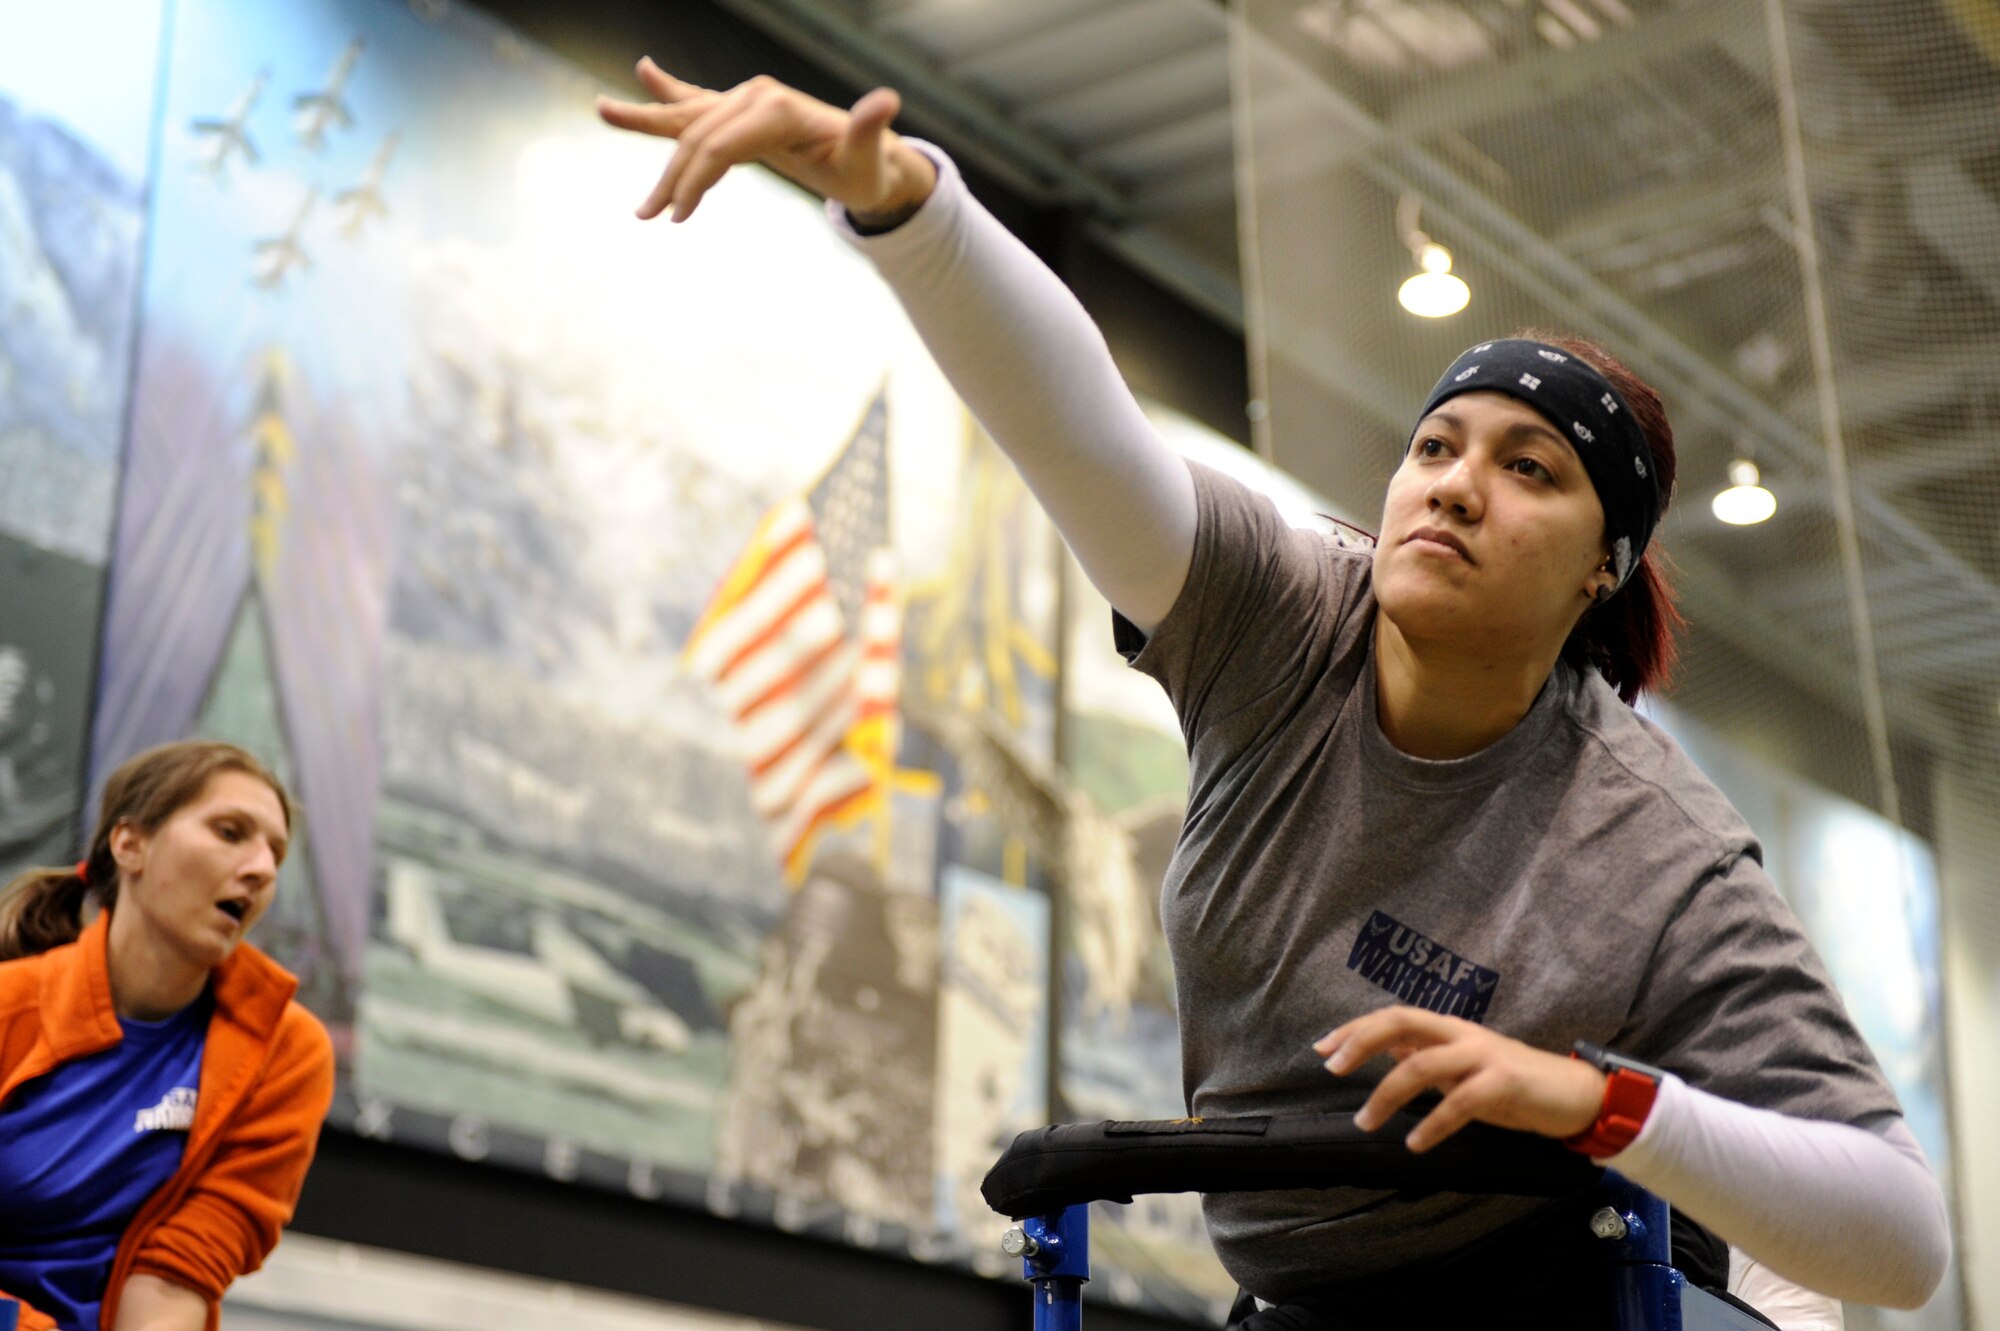 Retired Staff Sgt. Zuleika Cruz-Pereira practices the shot put prior to the start of the 2013 Warrior Games in Colorado Springs, Colo.  More than 200 athletes from all services are competing from May 11 through May 16, 2013. (DoD photo/Desiree N. Palacios)